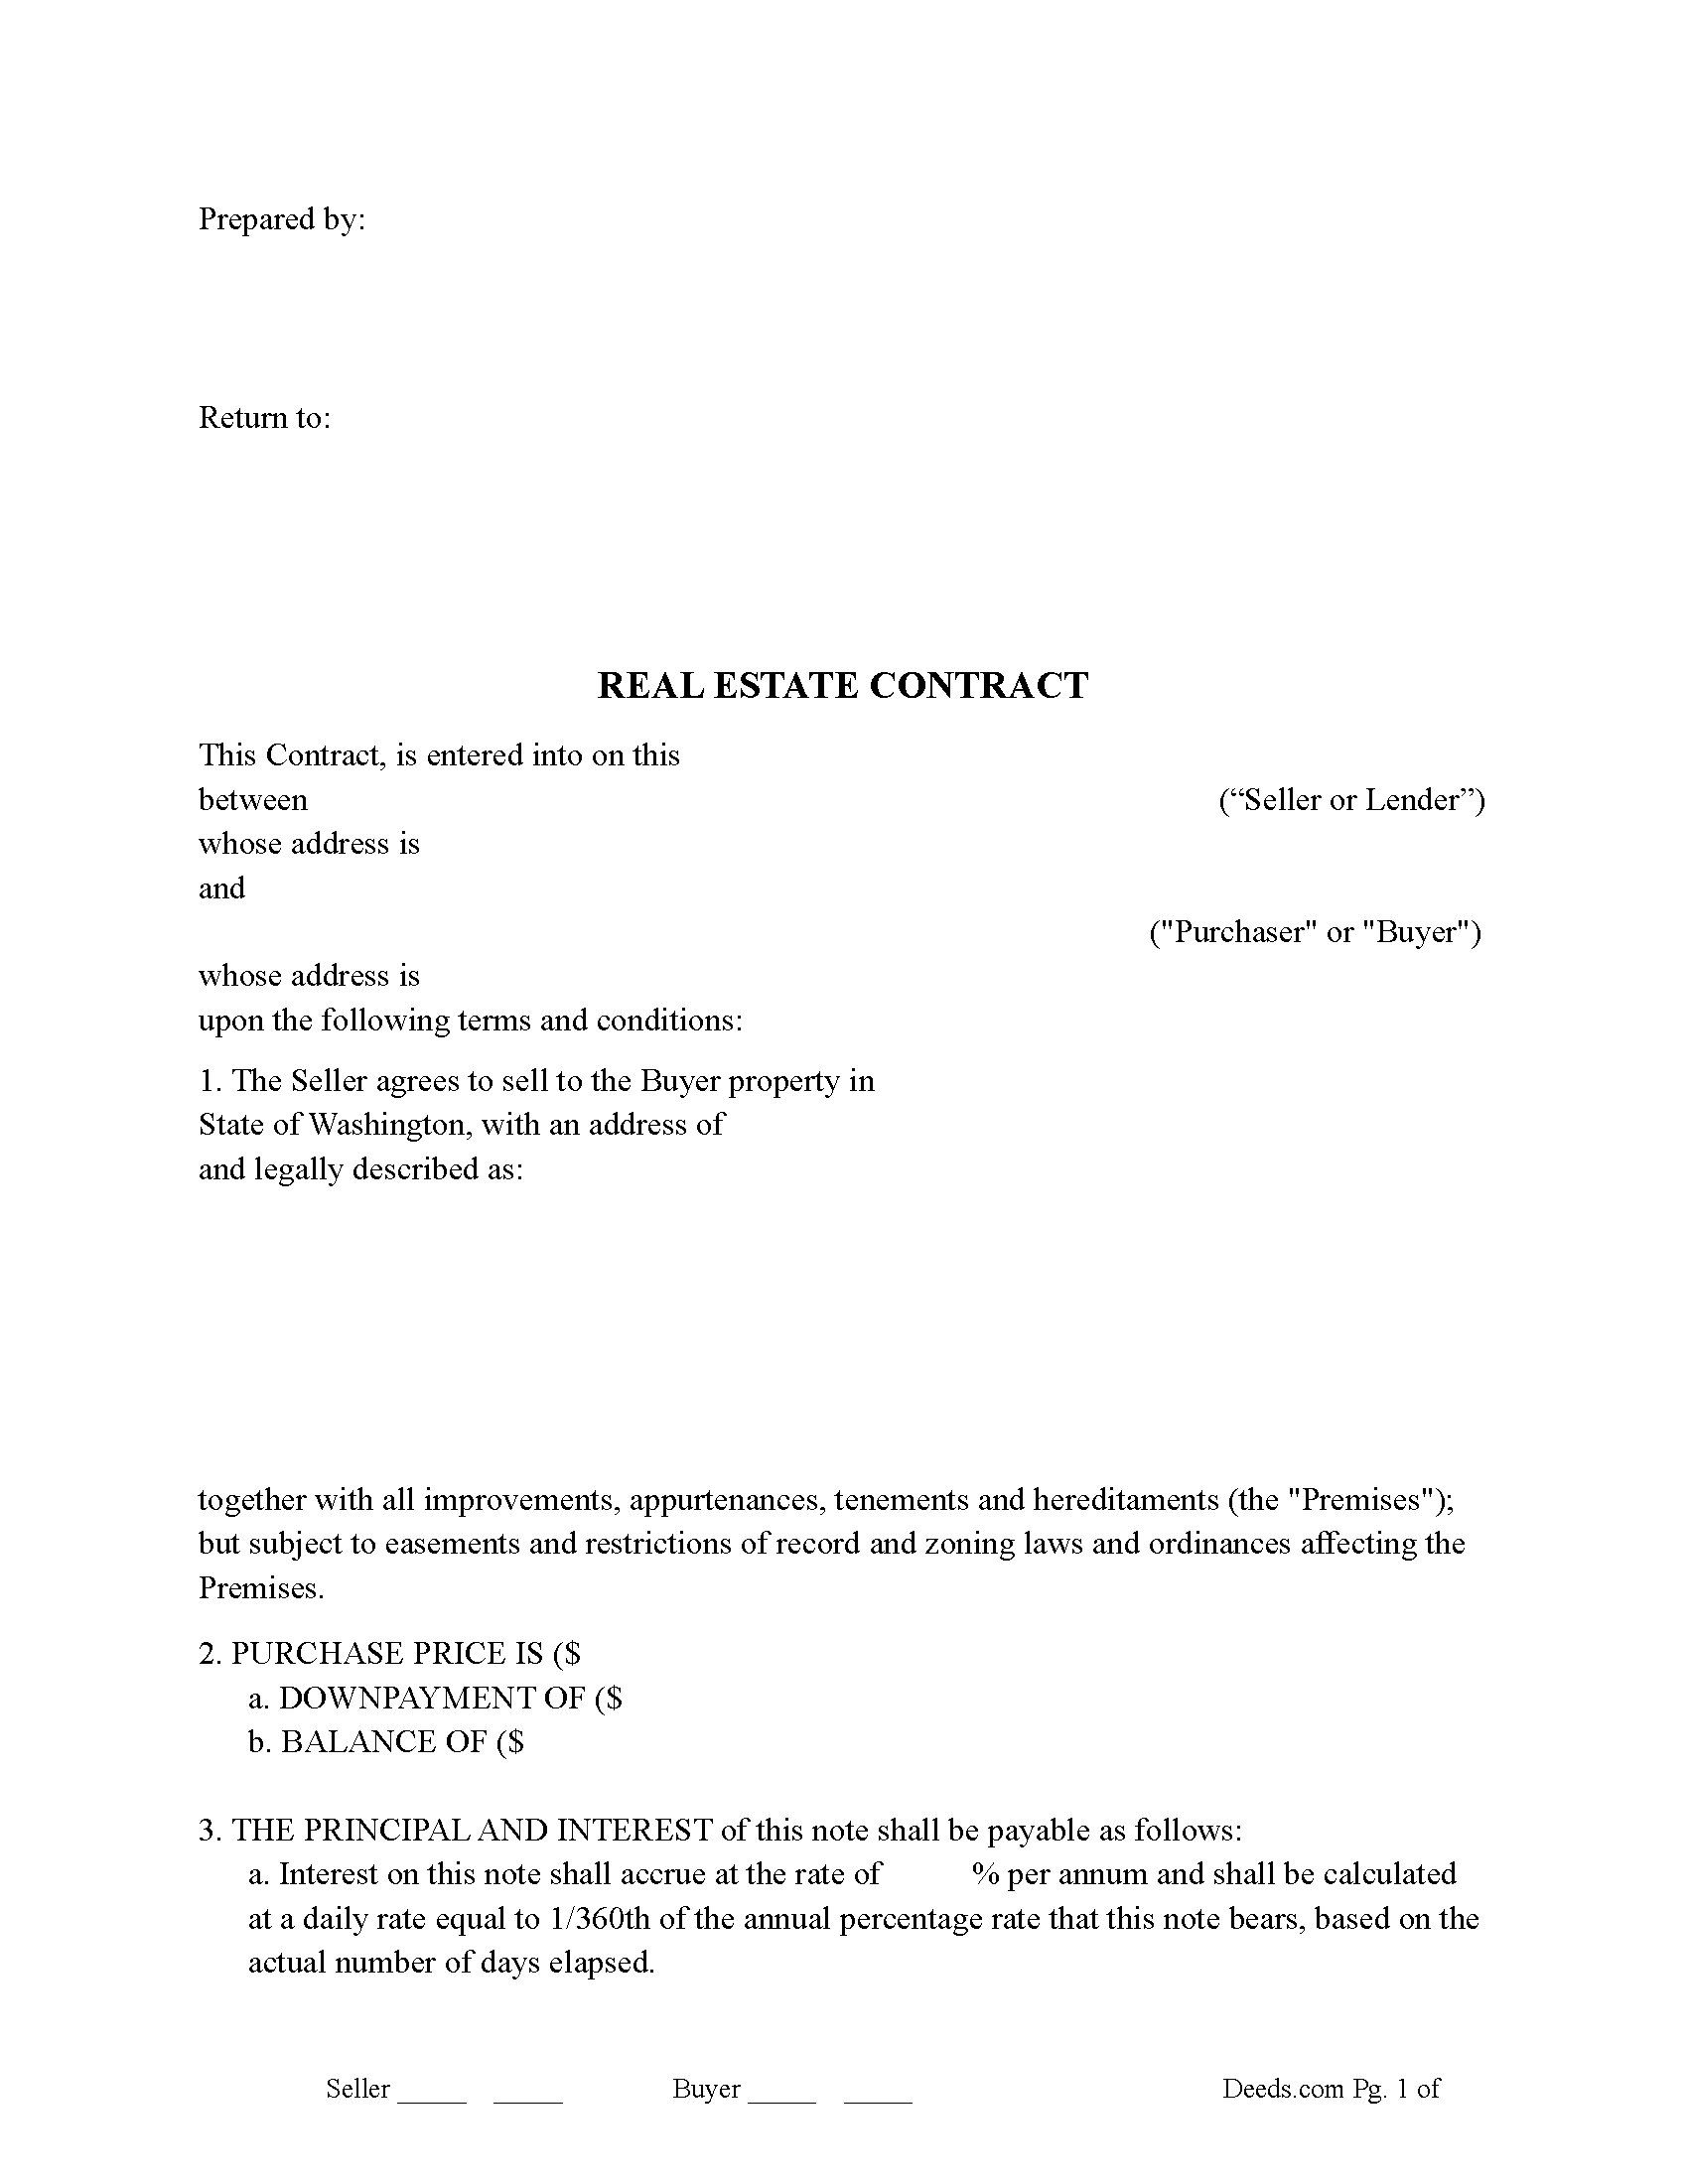 Lewis County Real Estate Contract Form